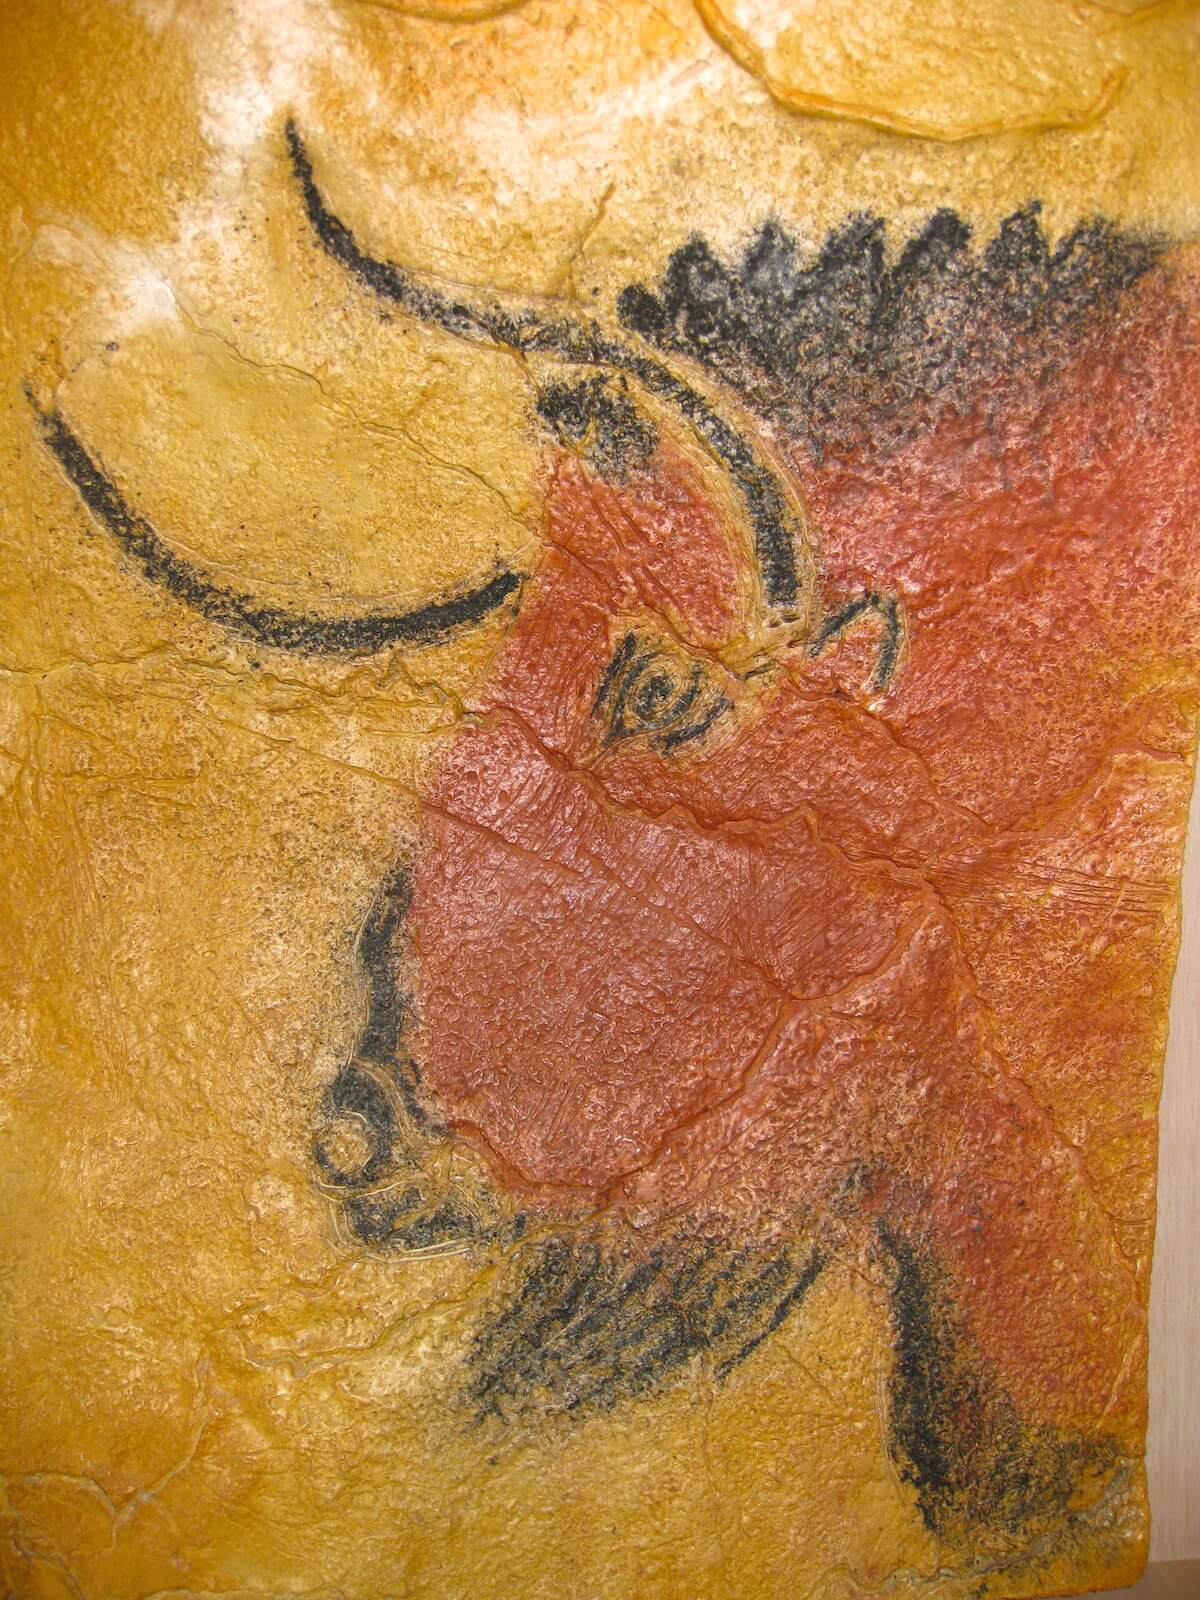 Cave painting of a bison at Altamira Caves in Spain.